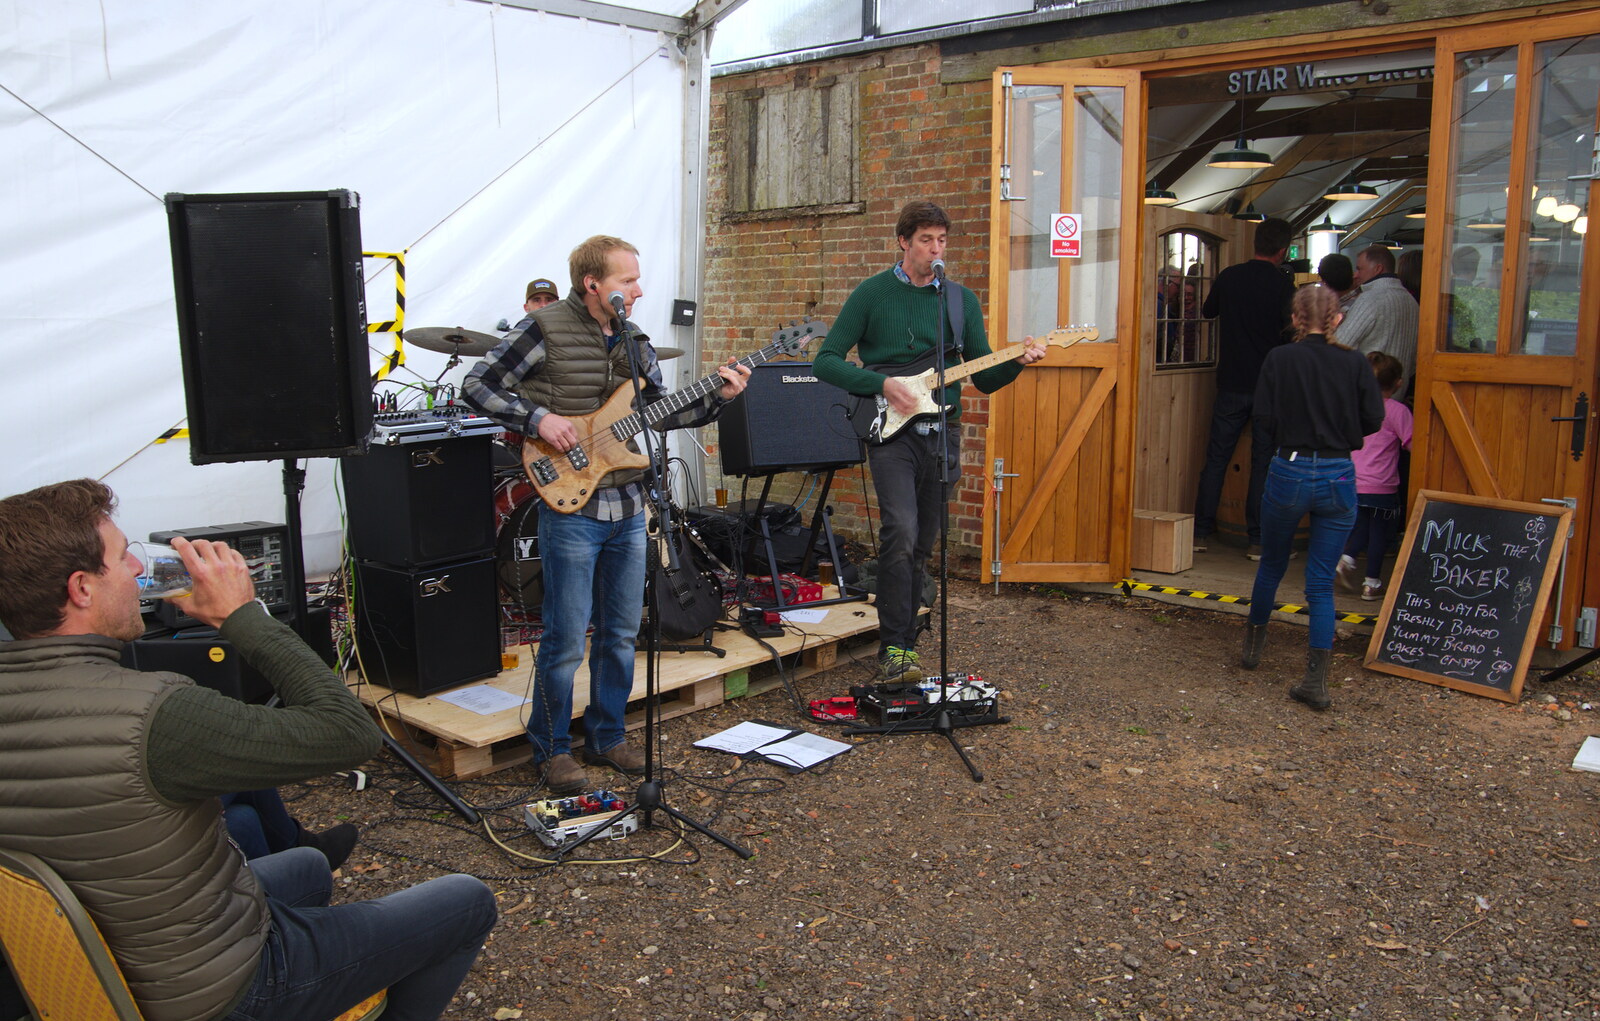 A band does its thing from The Opening of Star Wing Brewery's Tap Room, Redgrave, Suffolk - 4th May 2019